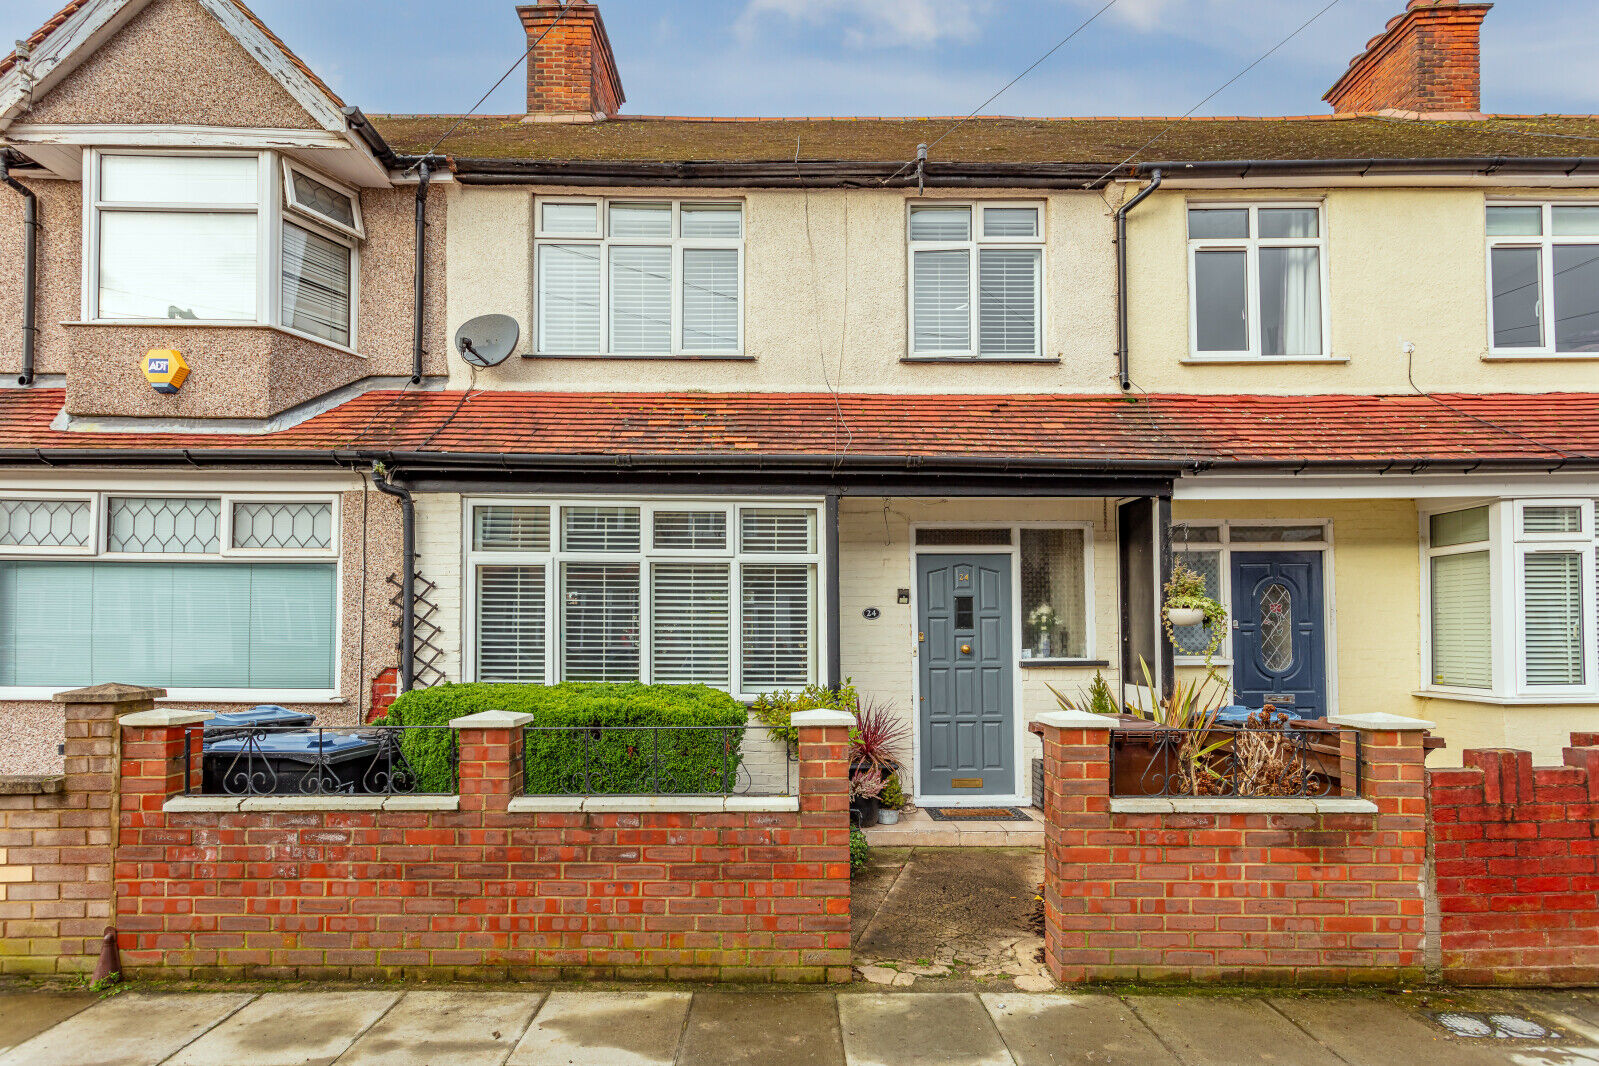 3 bedroom mid terraced house for sale Robinhood Close, Mitcham, CR4, main image